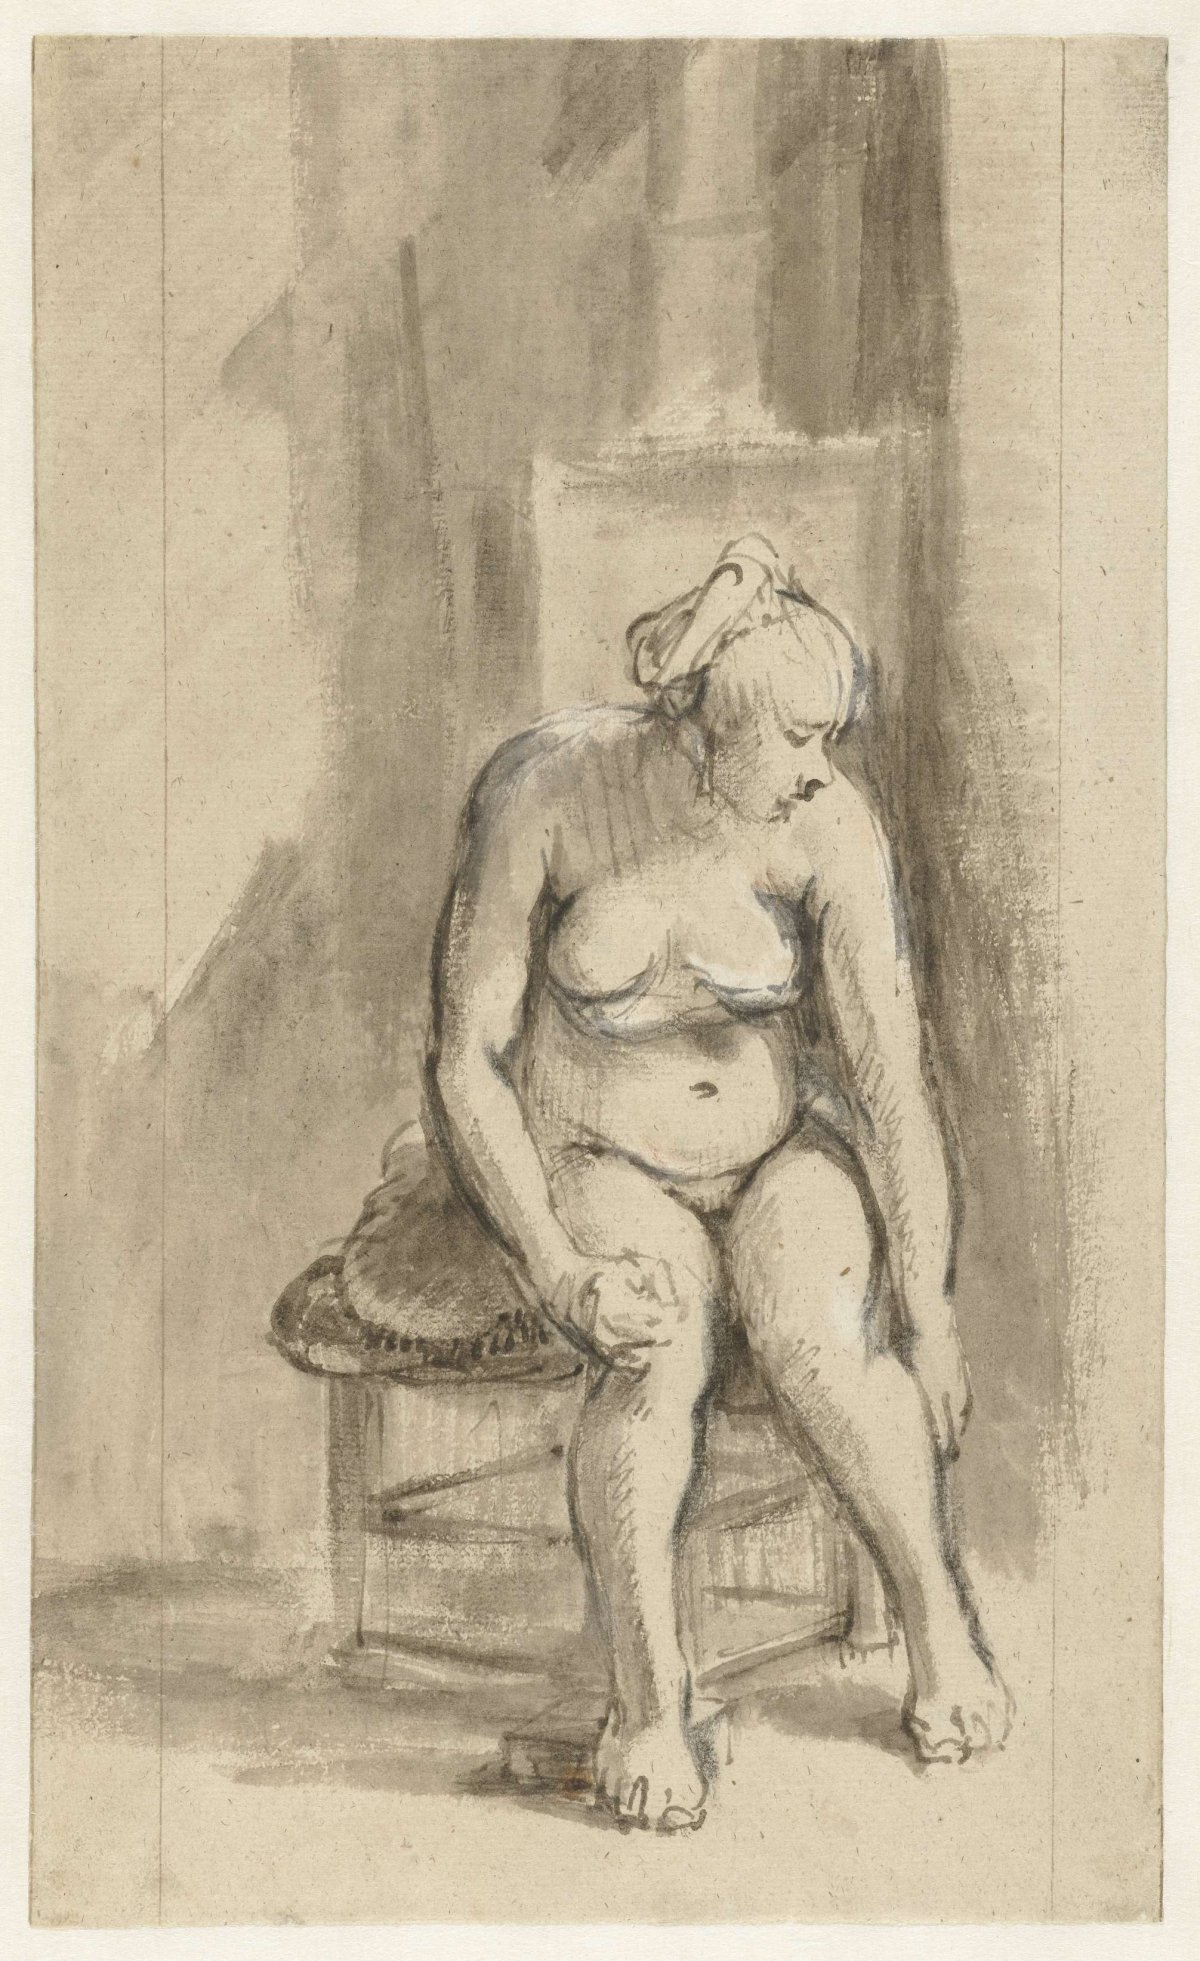 Nude Woman Seated by a Stove, Rembrandt van Rijn, c. 1661 - c. 1662